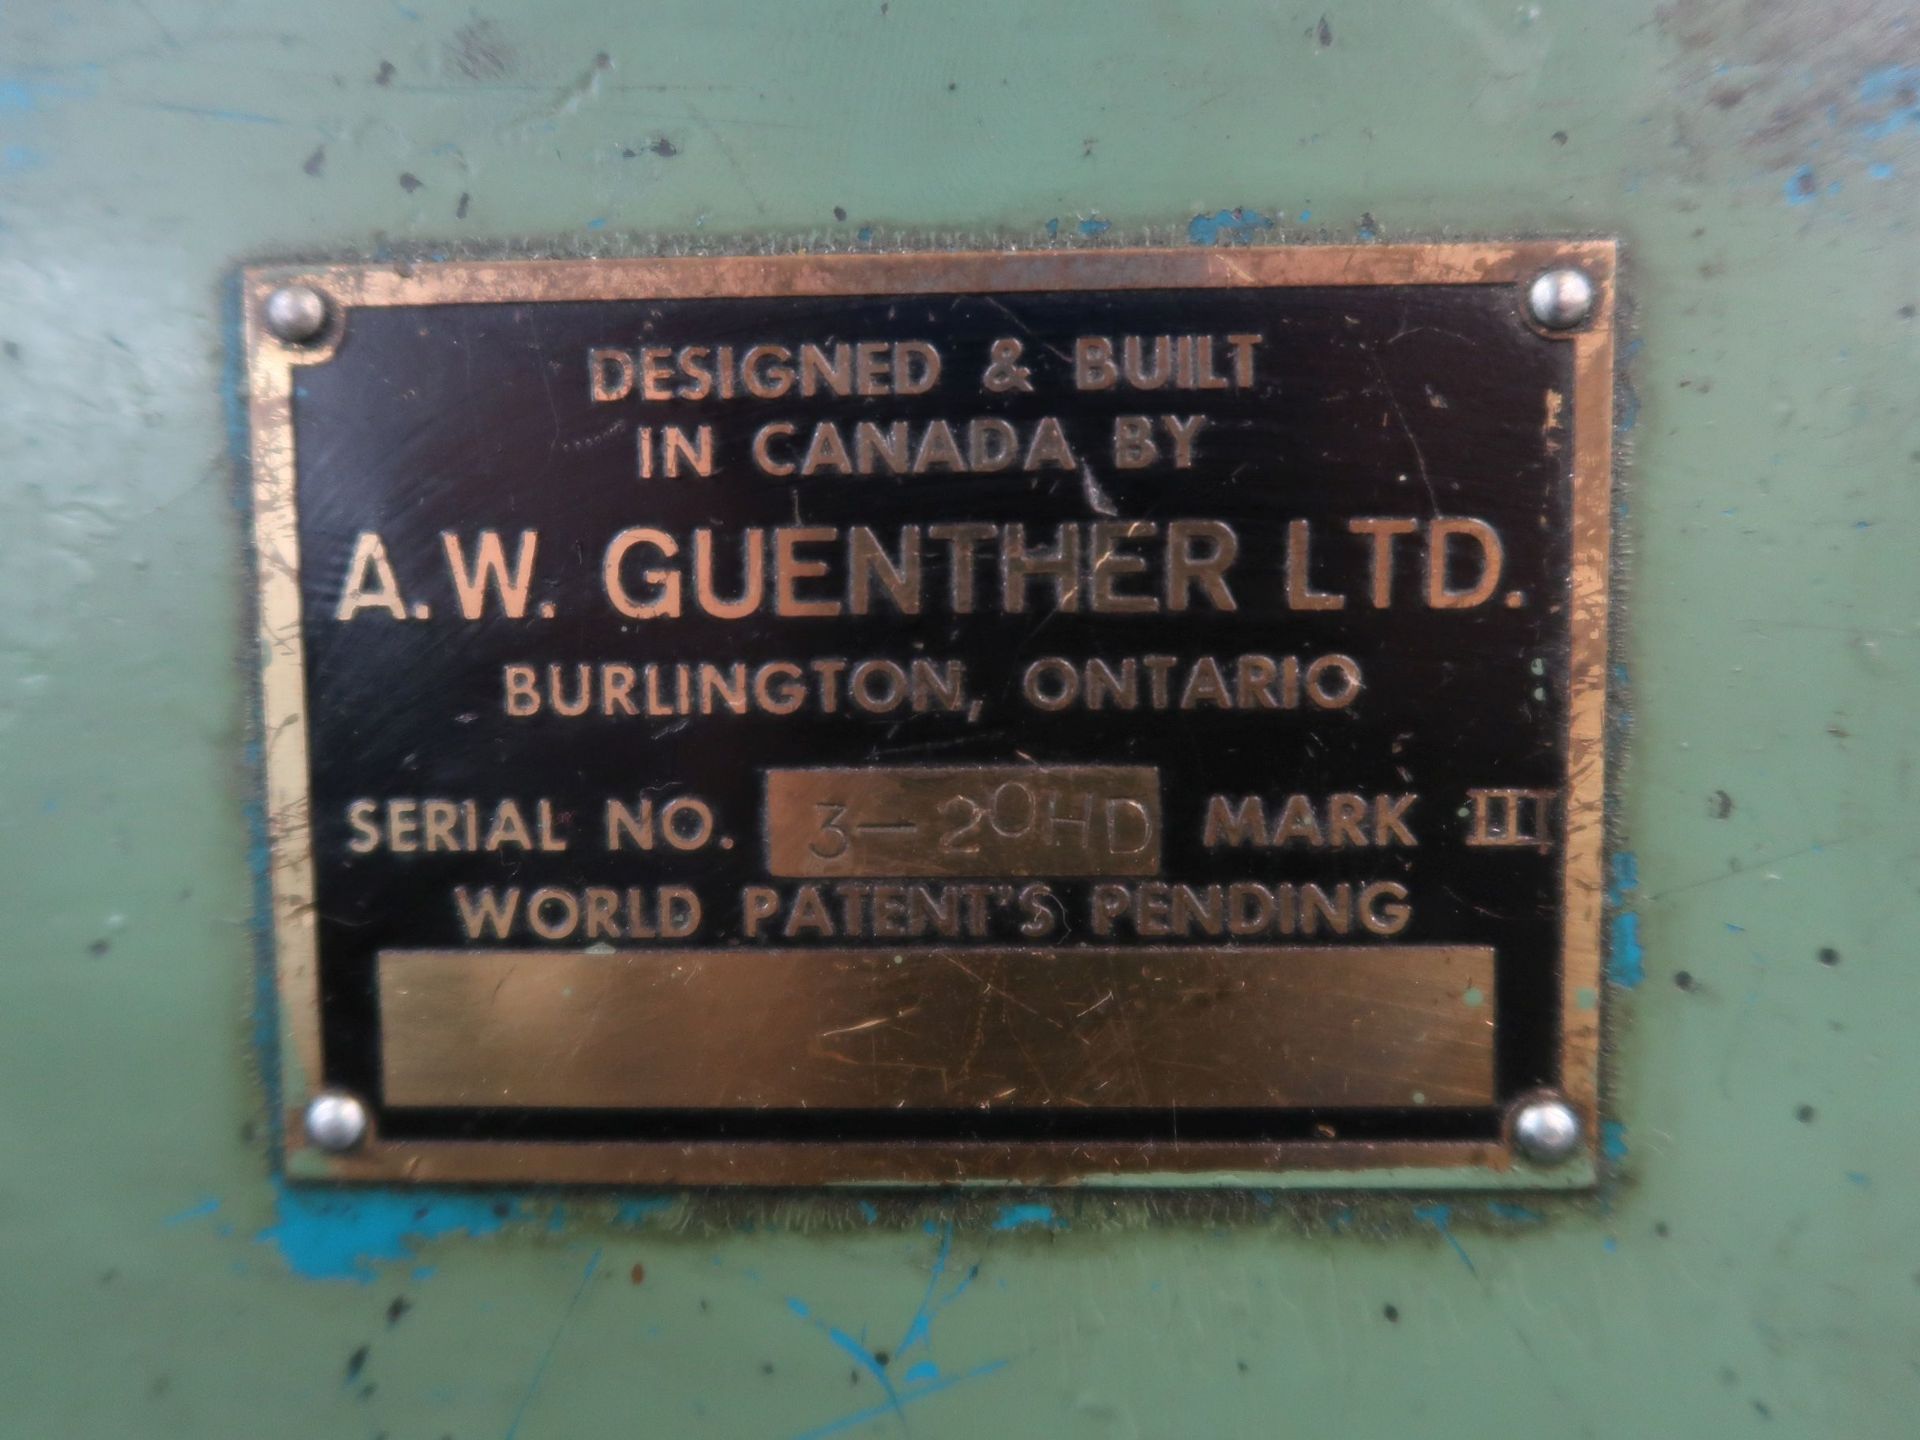 AW GUENTHER MARK III AUTOMATIC LOOPING MACHINE; S/N 3-2CHD - Image 6 of 6